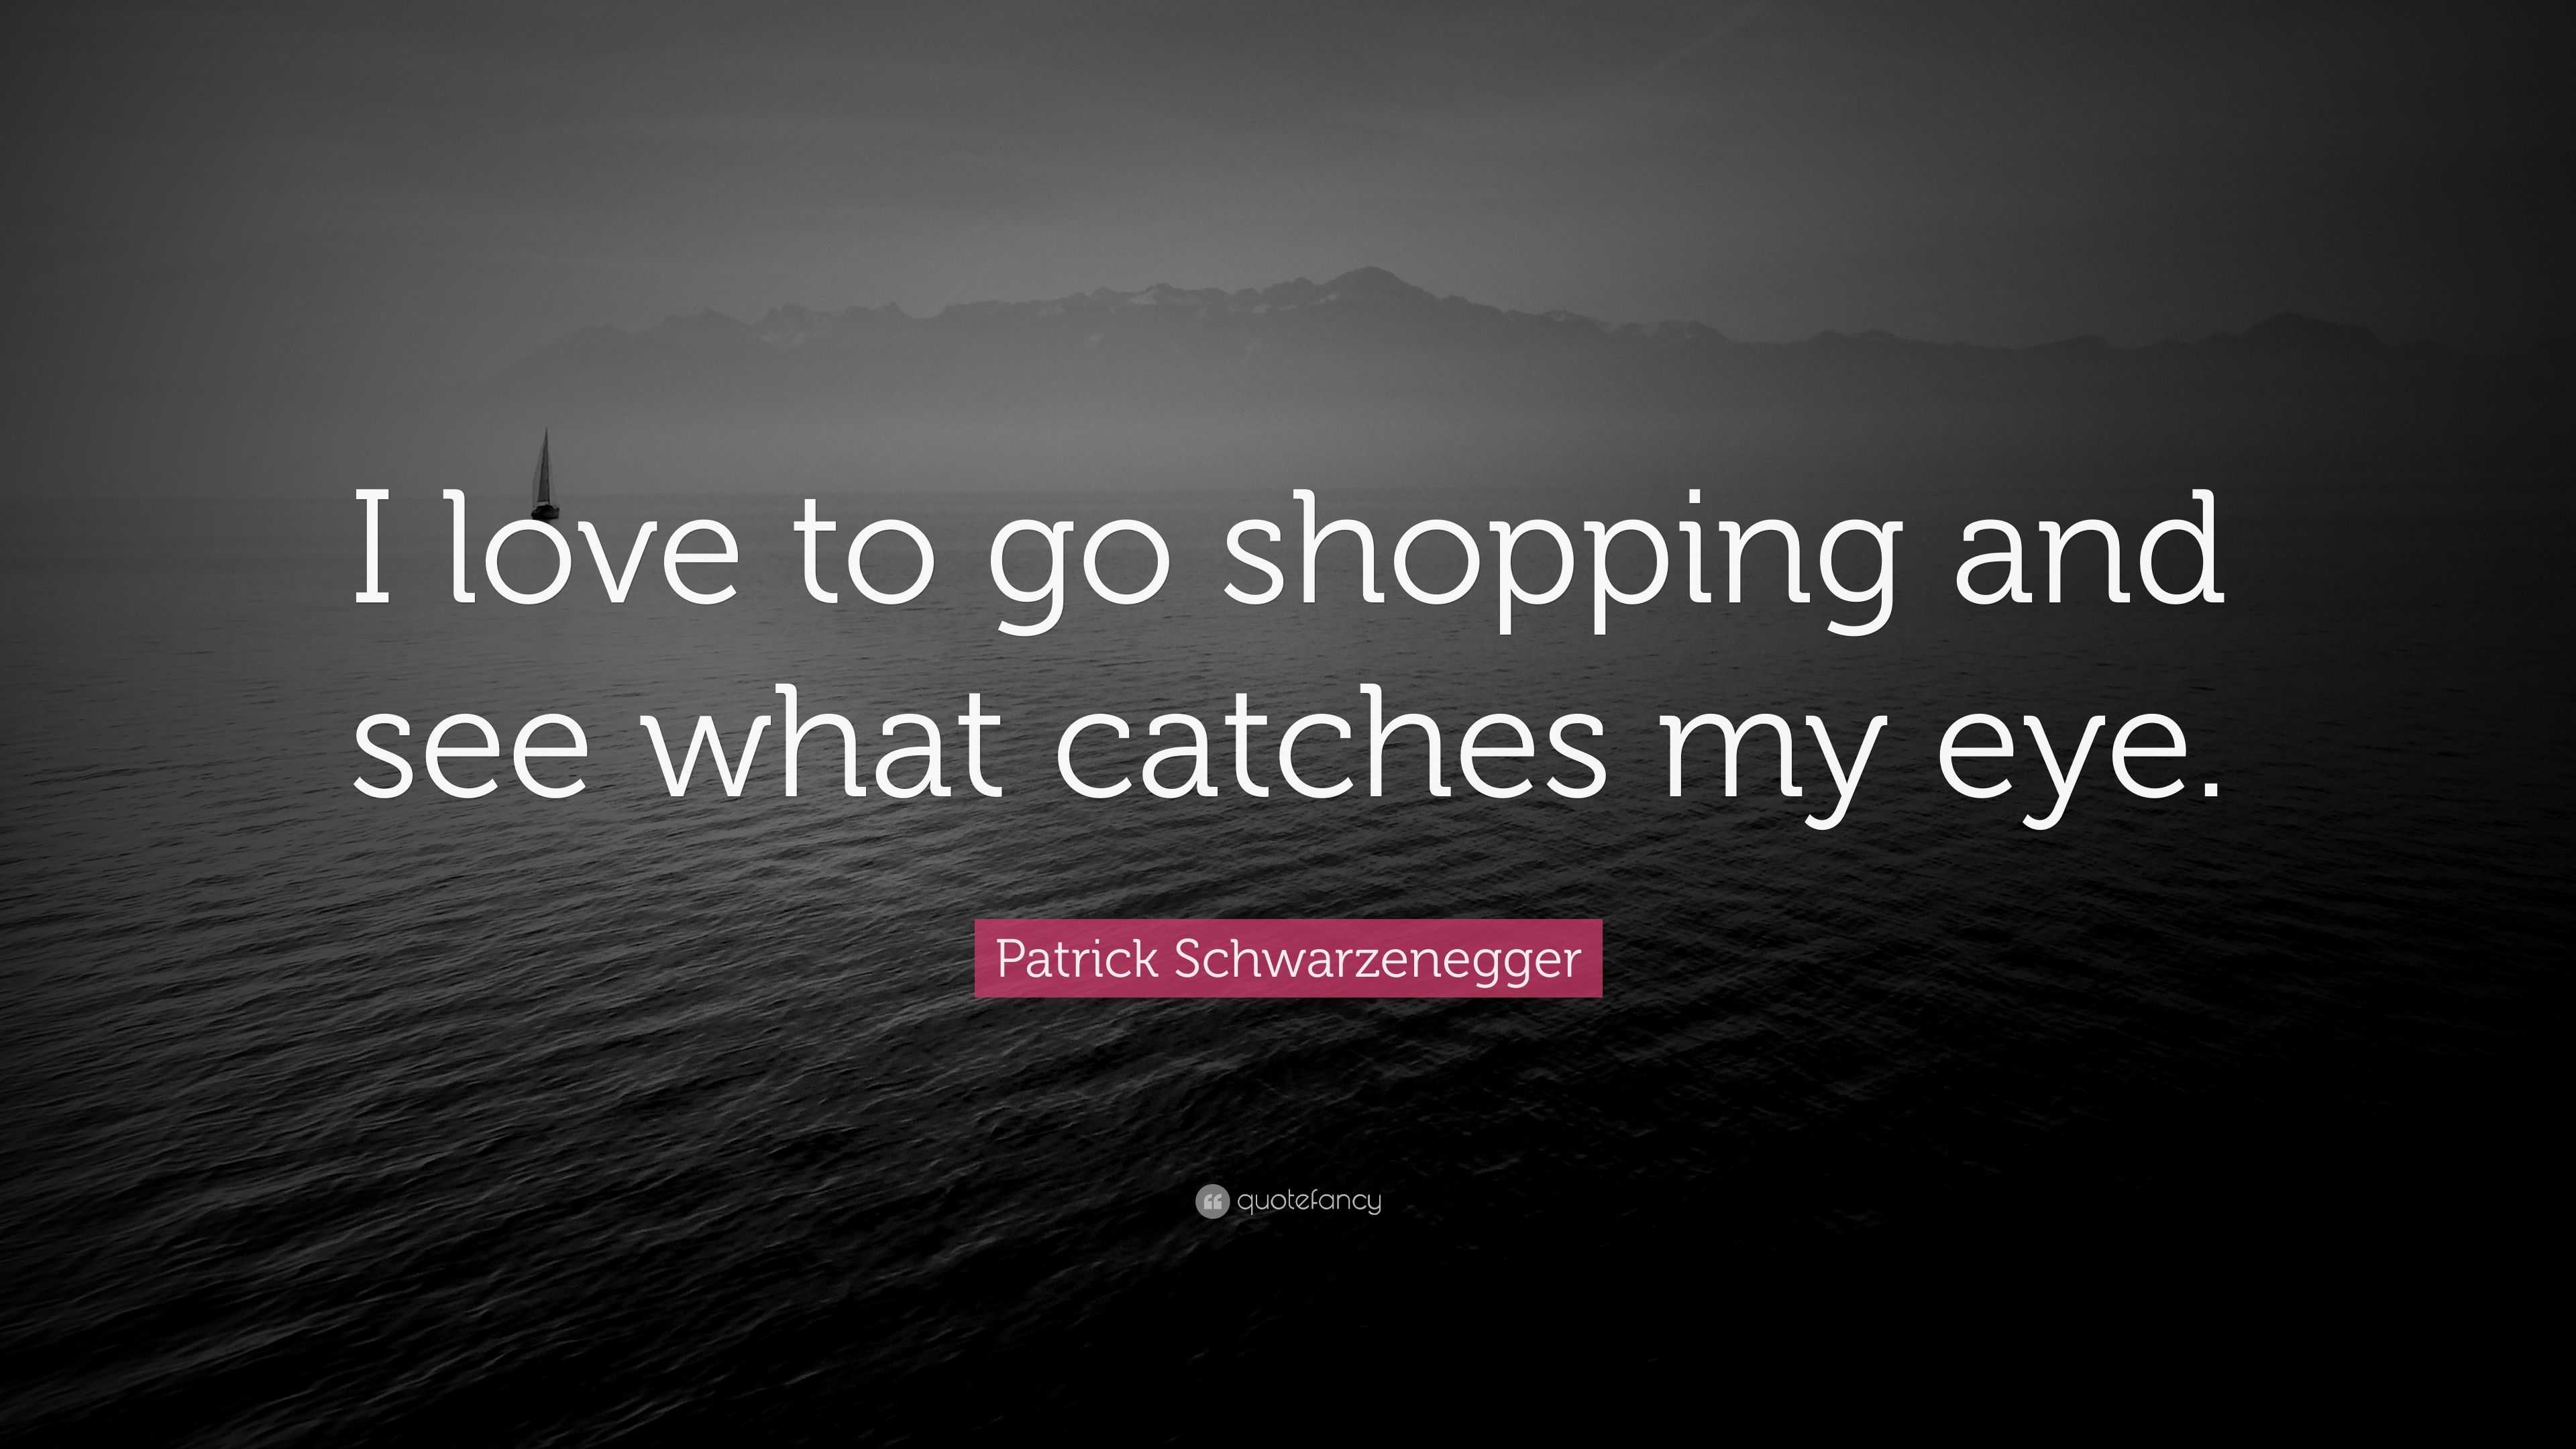 https://quotefancy.com/media/wallpaper/3840x2160/3253009-Patrick-Schwarzenegger-Quote-I-love-to-go-shopping-and-see-what.jpg